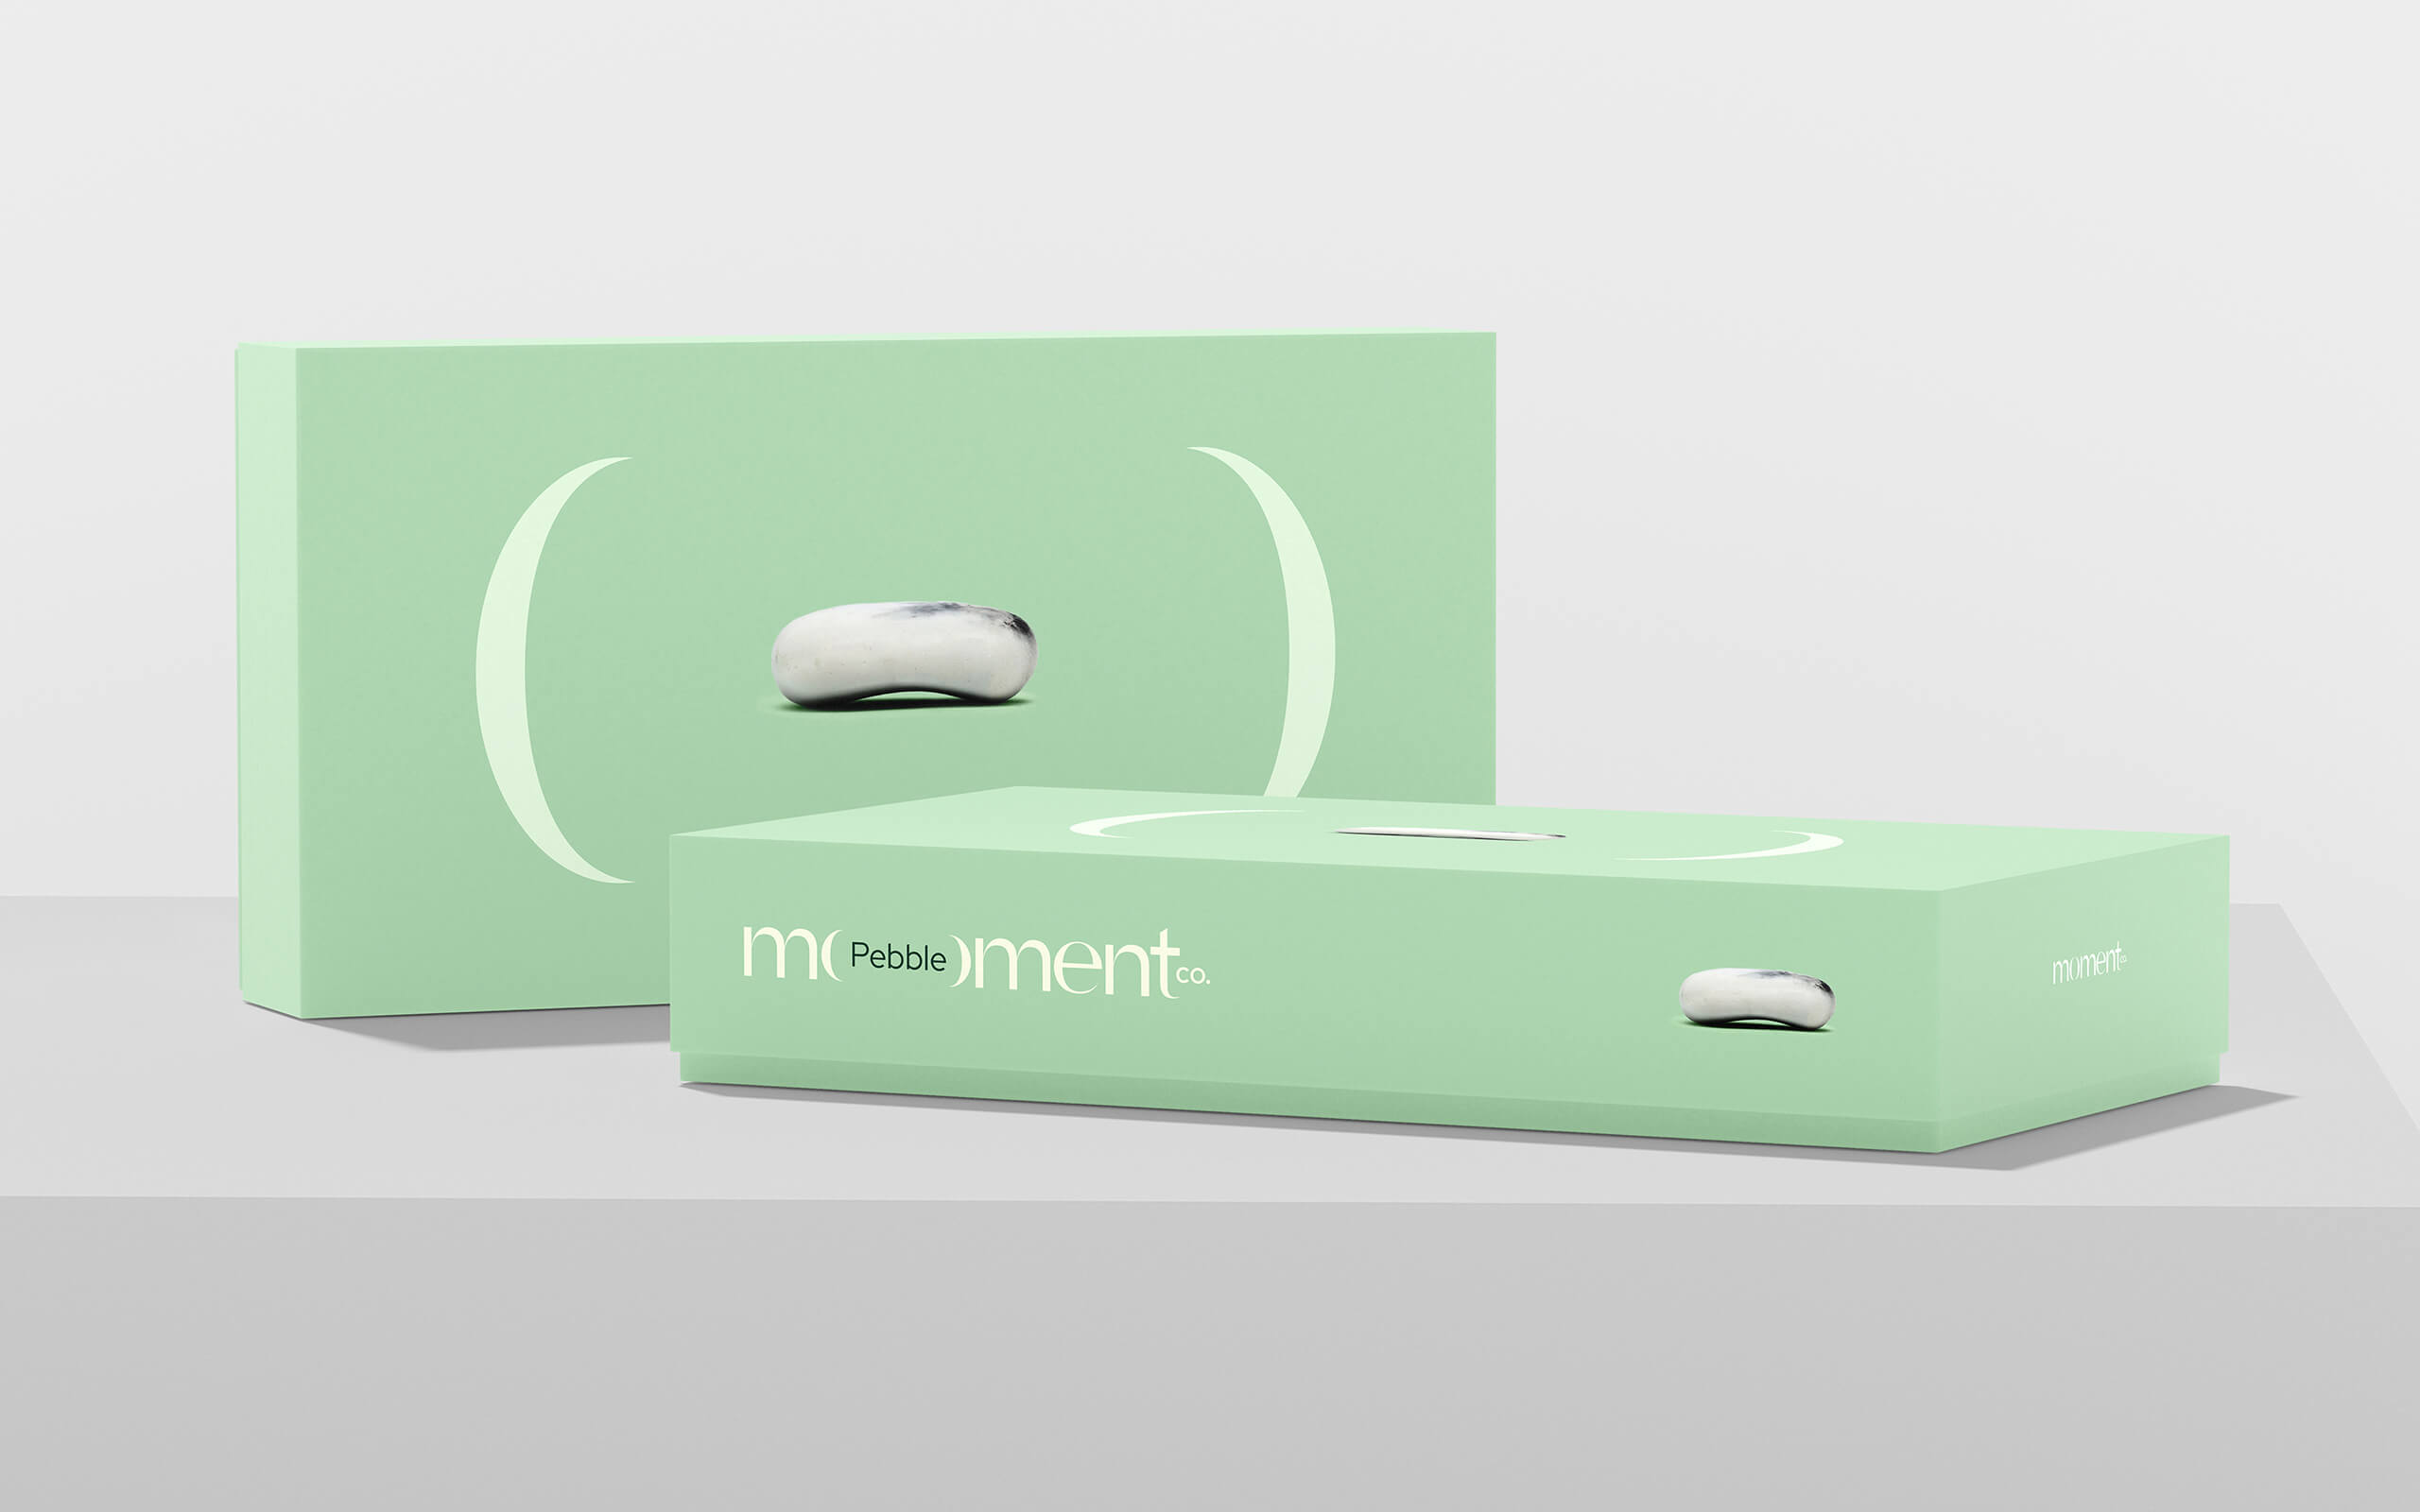 Taller Design Creates Mindful Brand for Moment Company